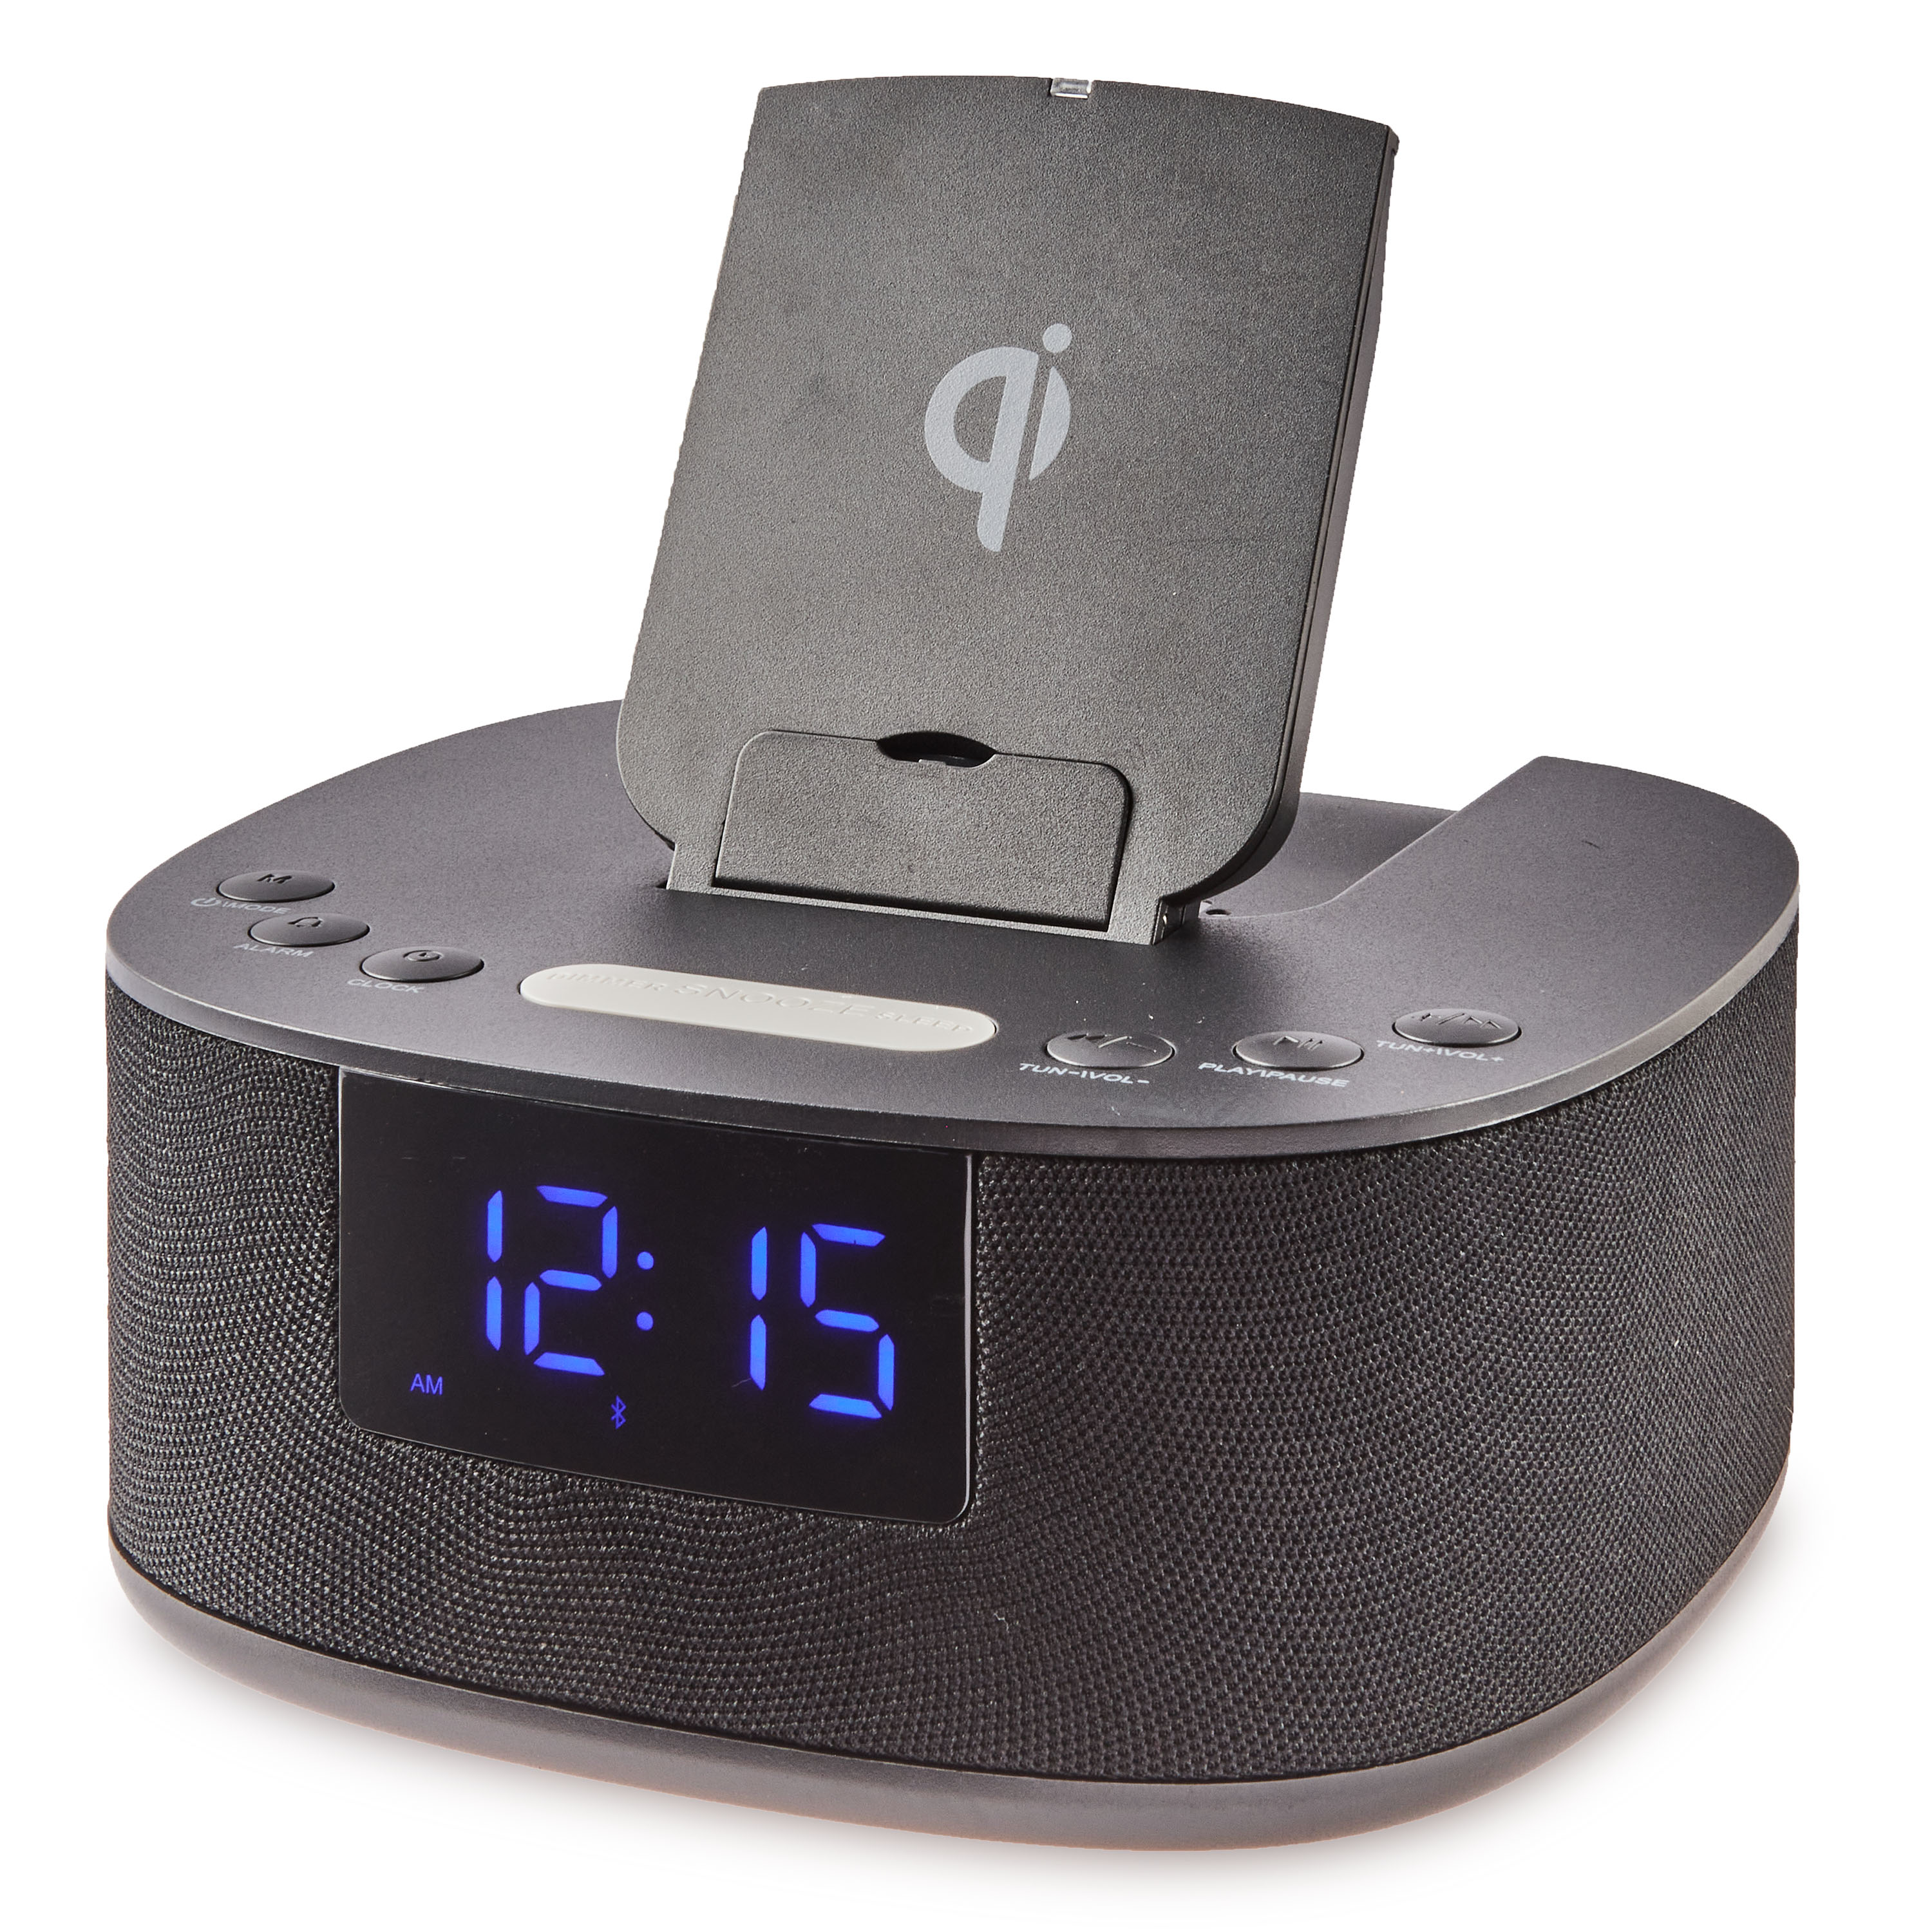 onn. Clock Radio with Wireless Charging and Bluetooth Speaker - image 1 of 5